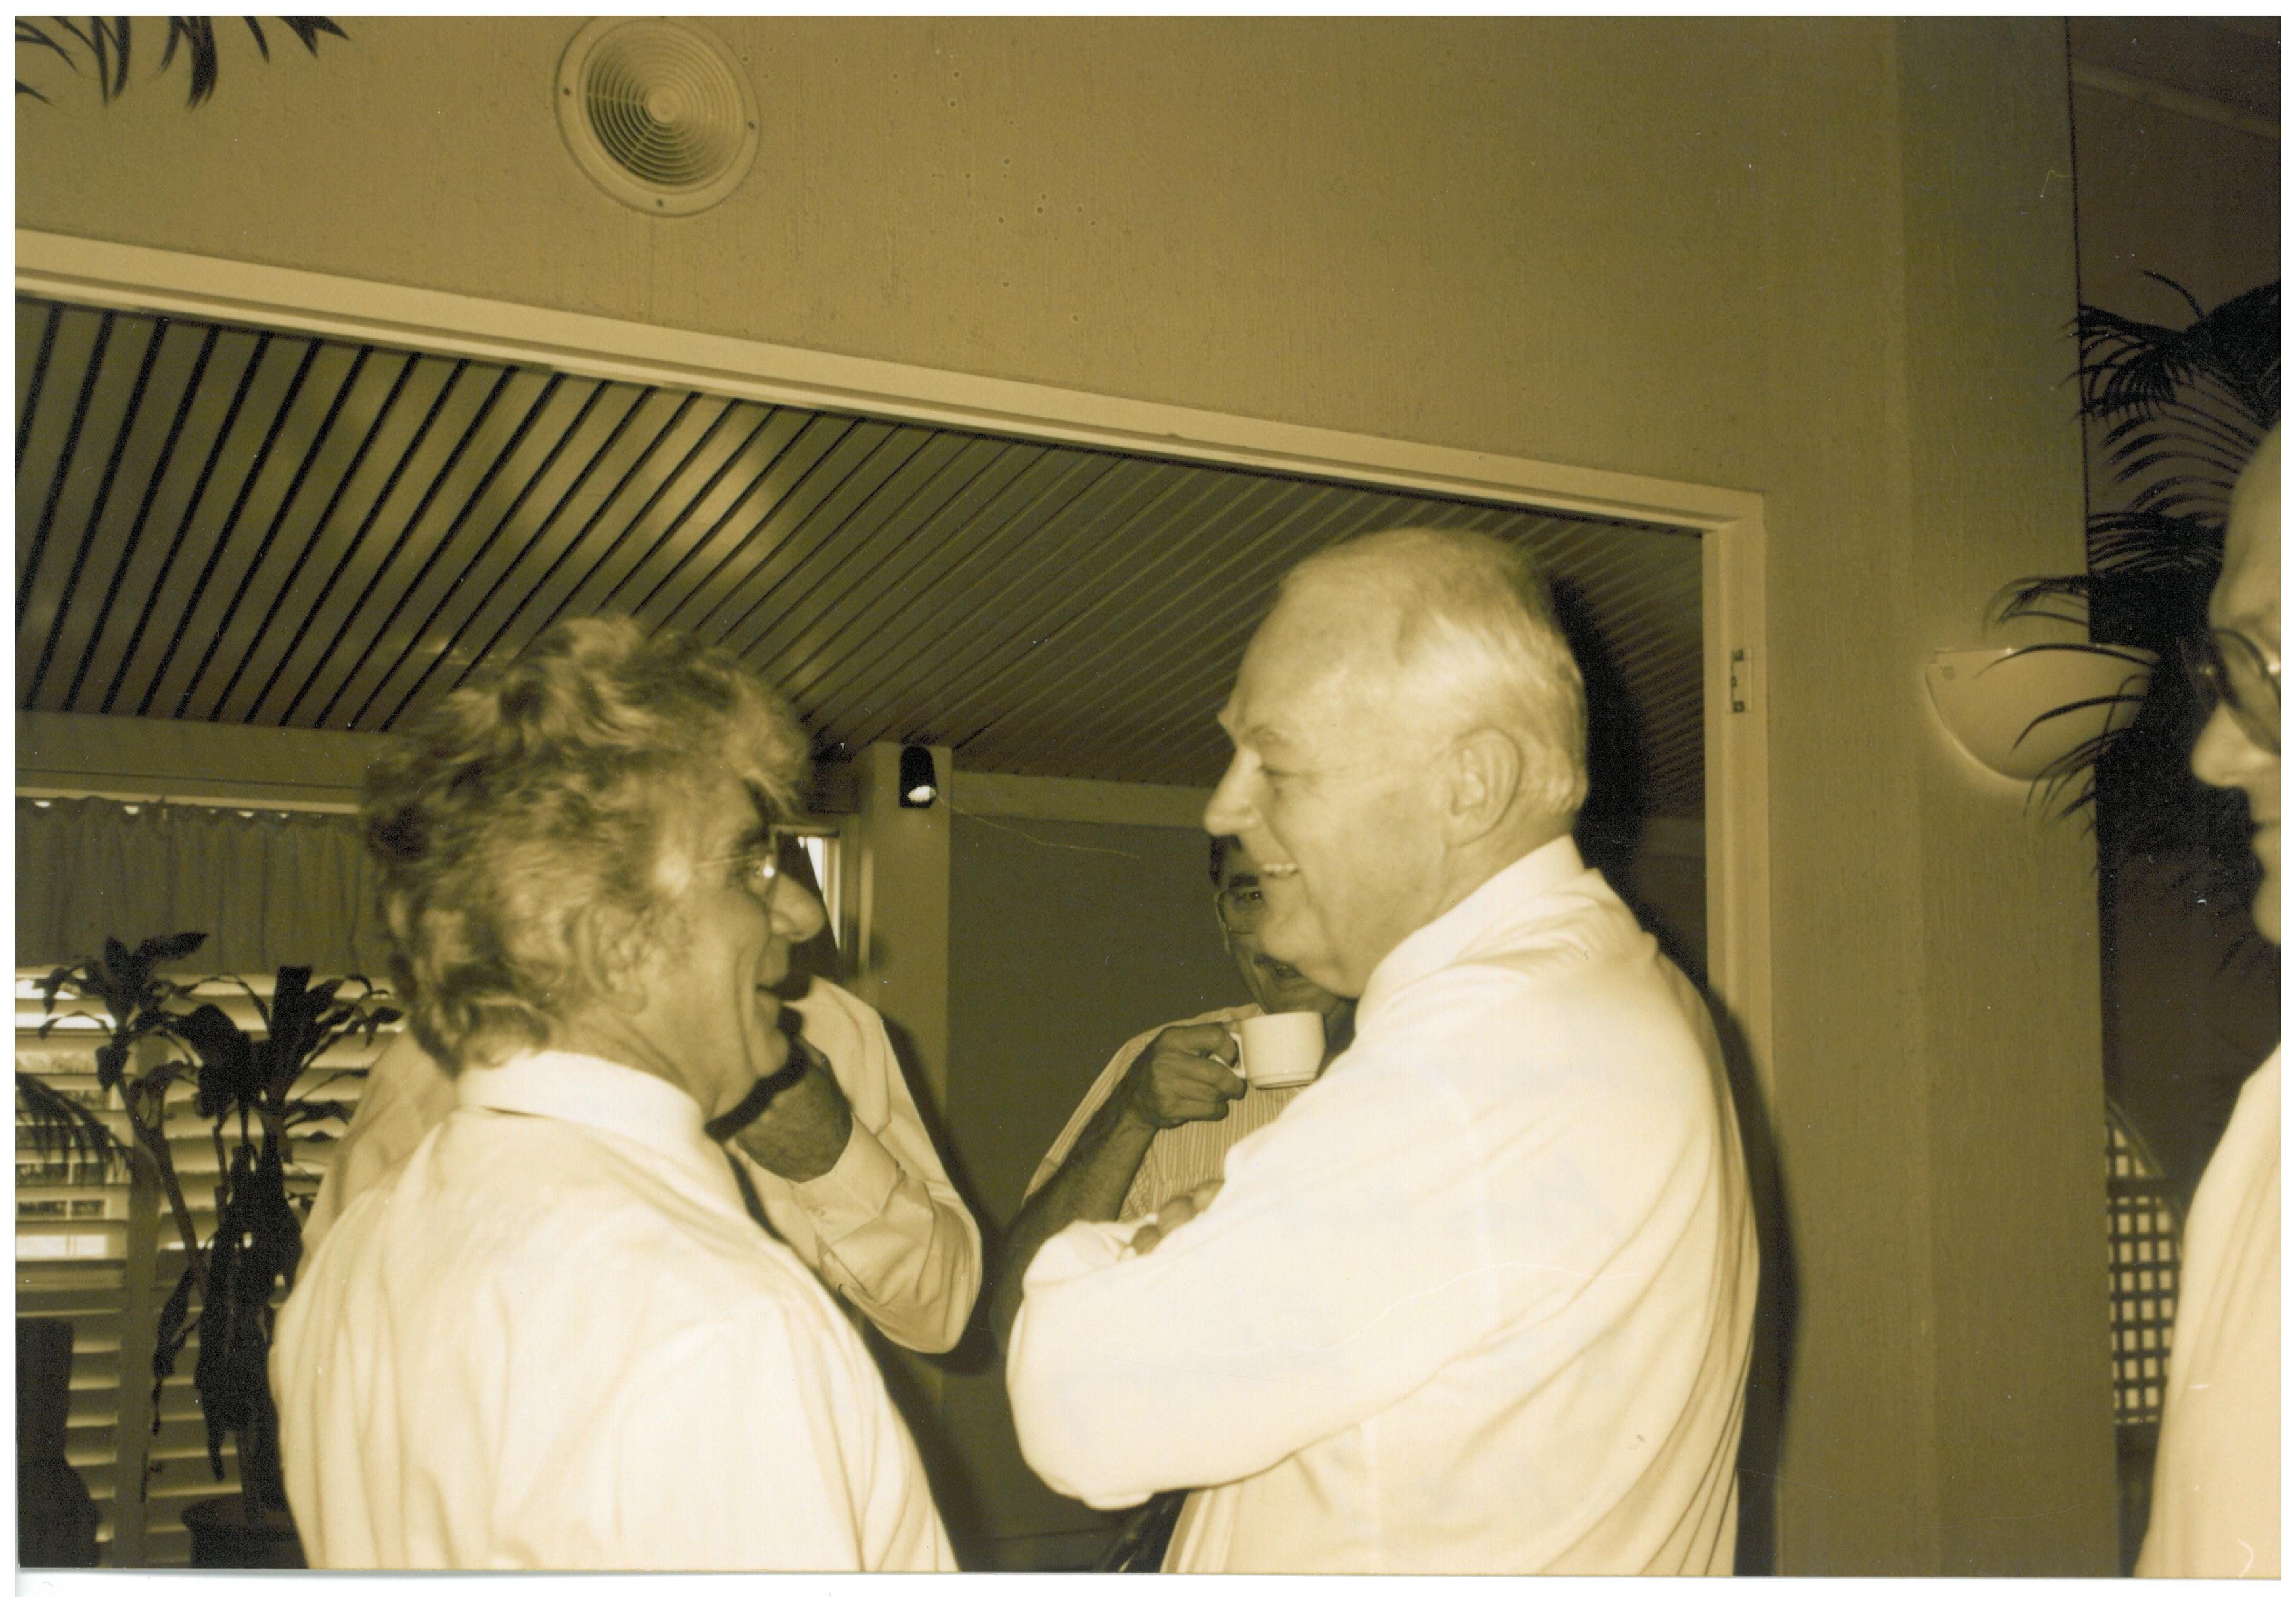 Committee chair Senator John Herron (right) speaking to witnesses Remzi Mulla [Chairman, Tobacco Leaf Marketing Board, Queensland] during a break in the Cairns hearing, 22 February 1995.